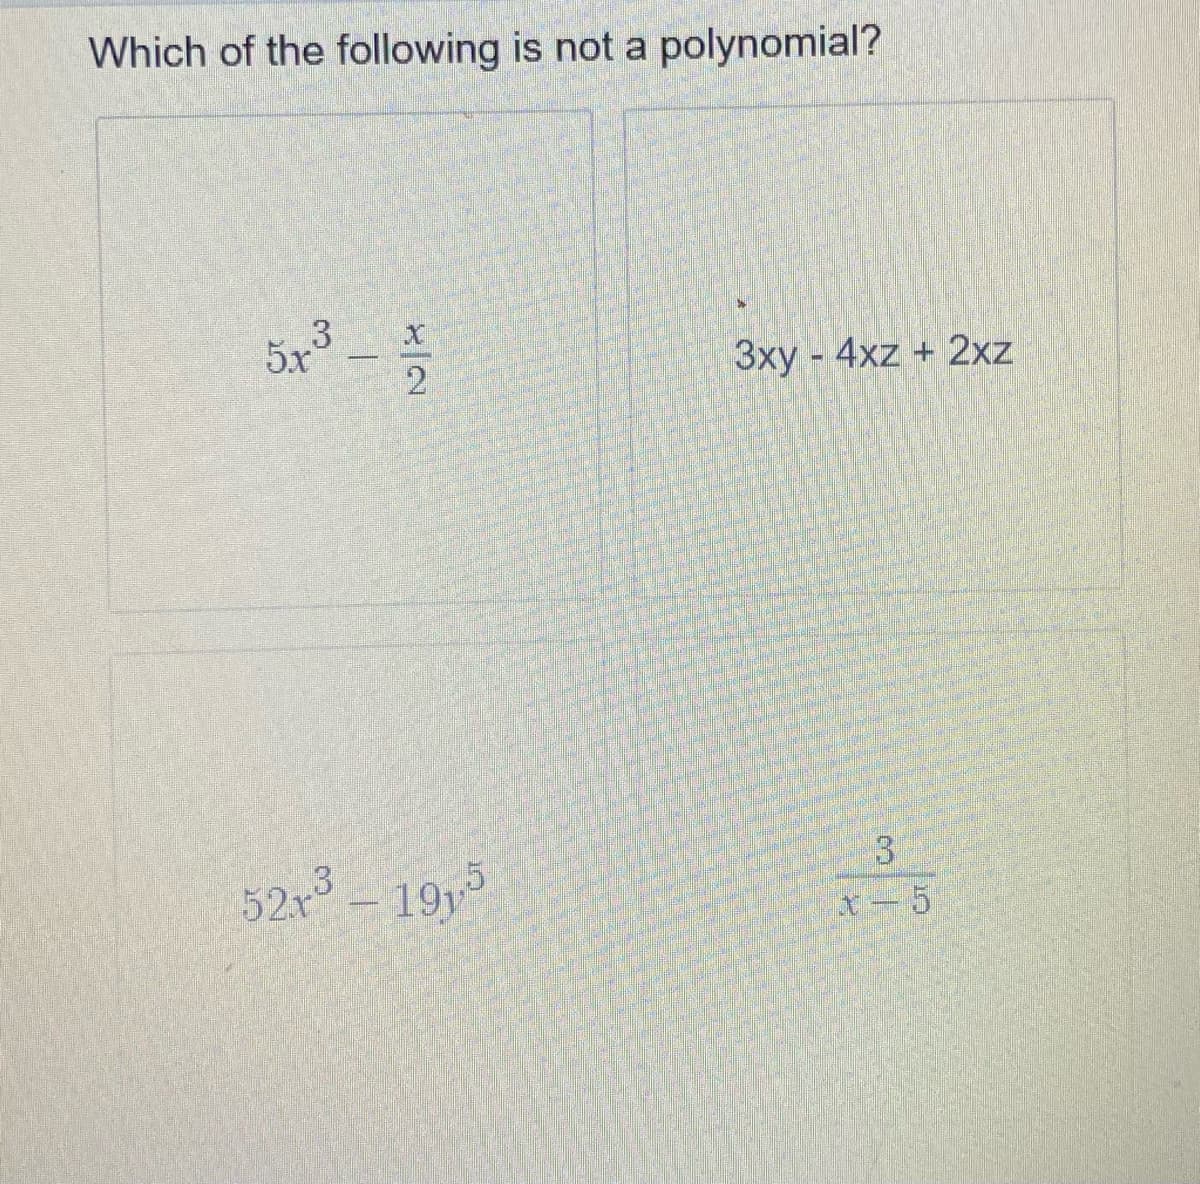 Which of the following is not a polynomial?
573
X
2
52x³ – 19y5
*
3xy - 4xz+ 2xz
3
x - 5